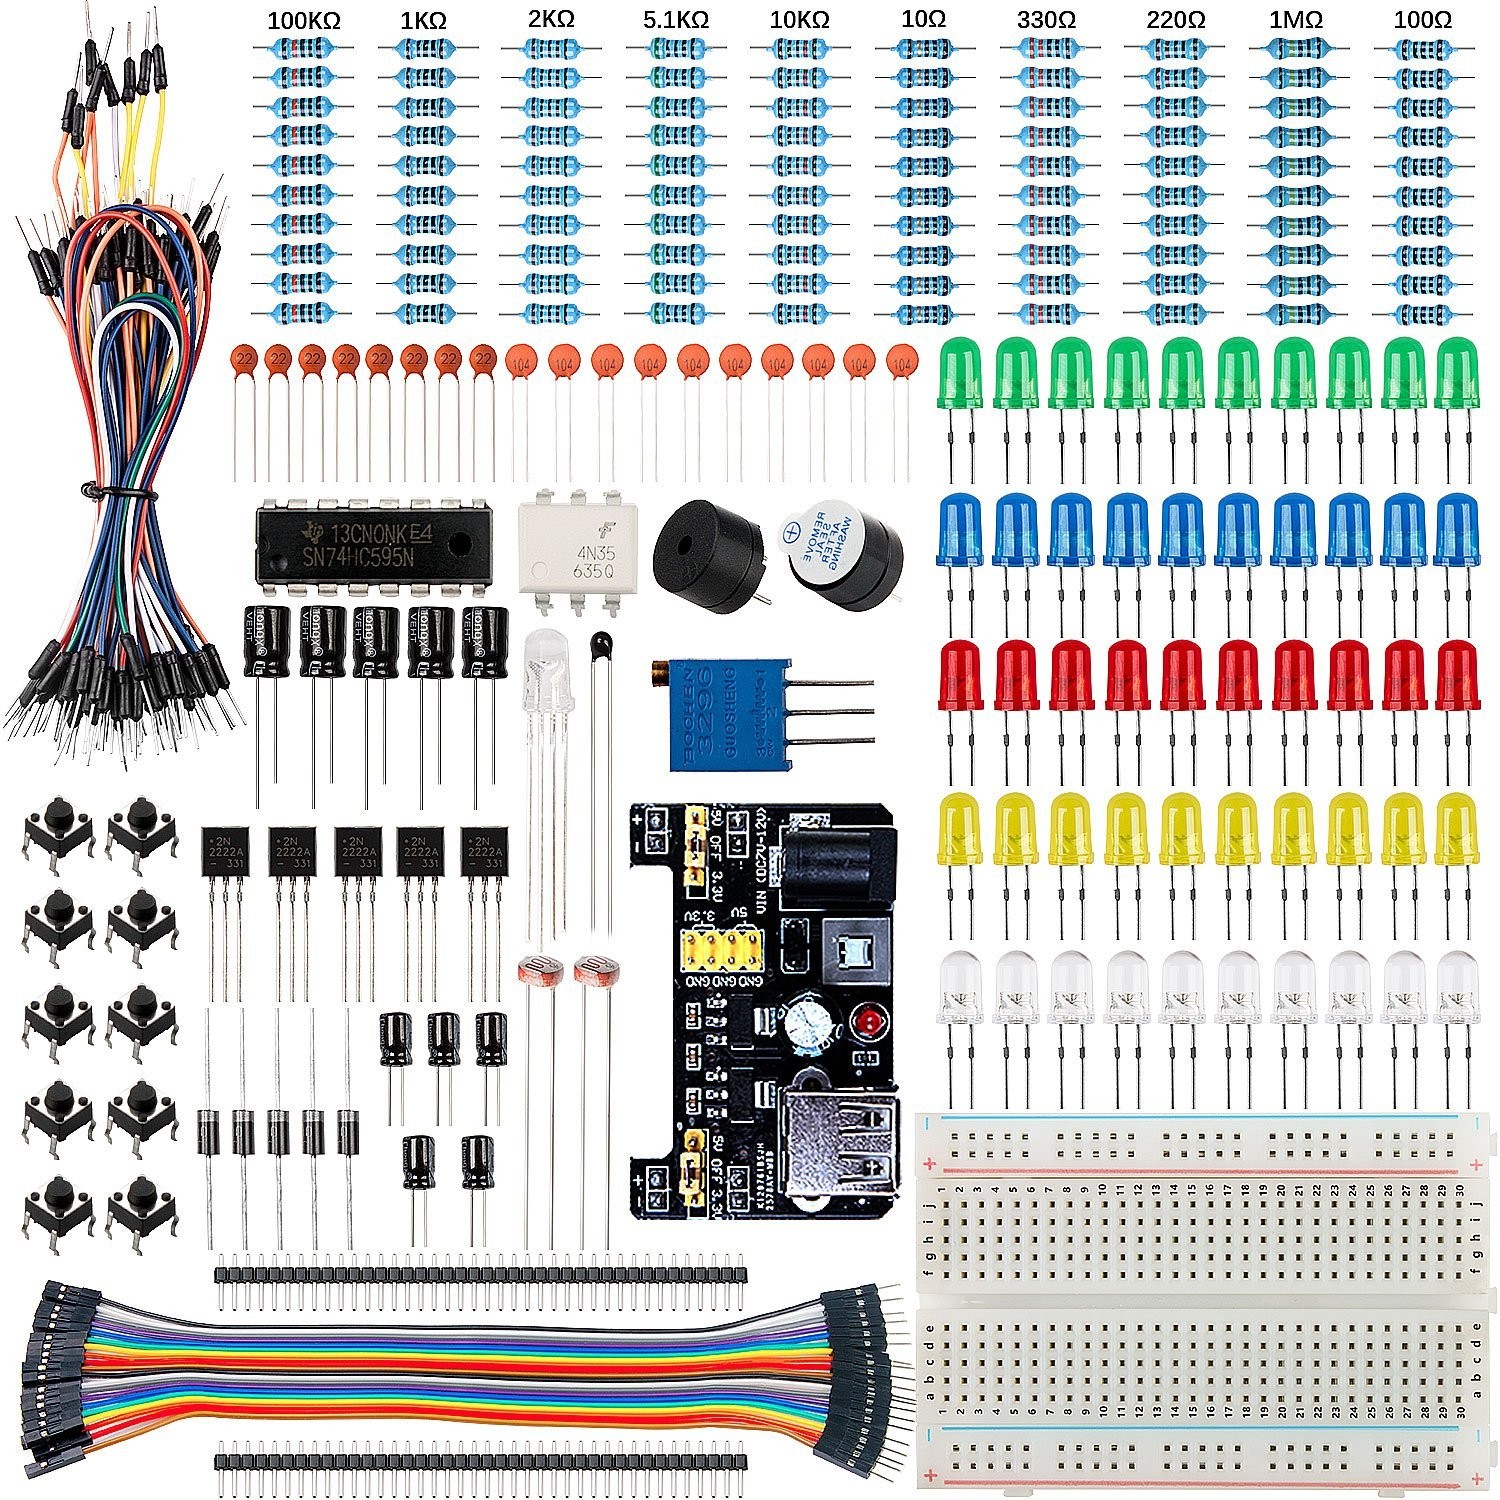 Kit Arduino K385 Electronica Basica E23 Itytarg - IT&T Argentina S.A.